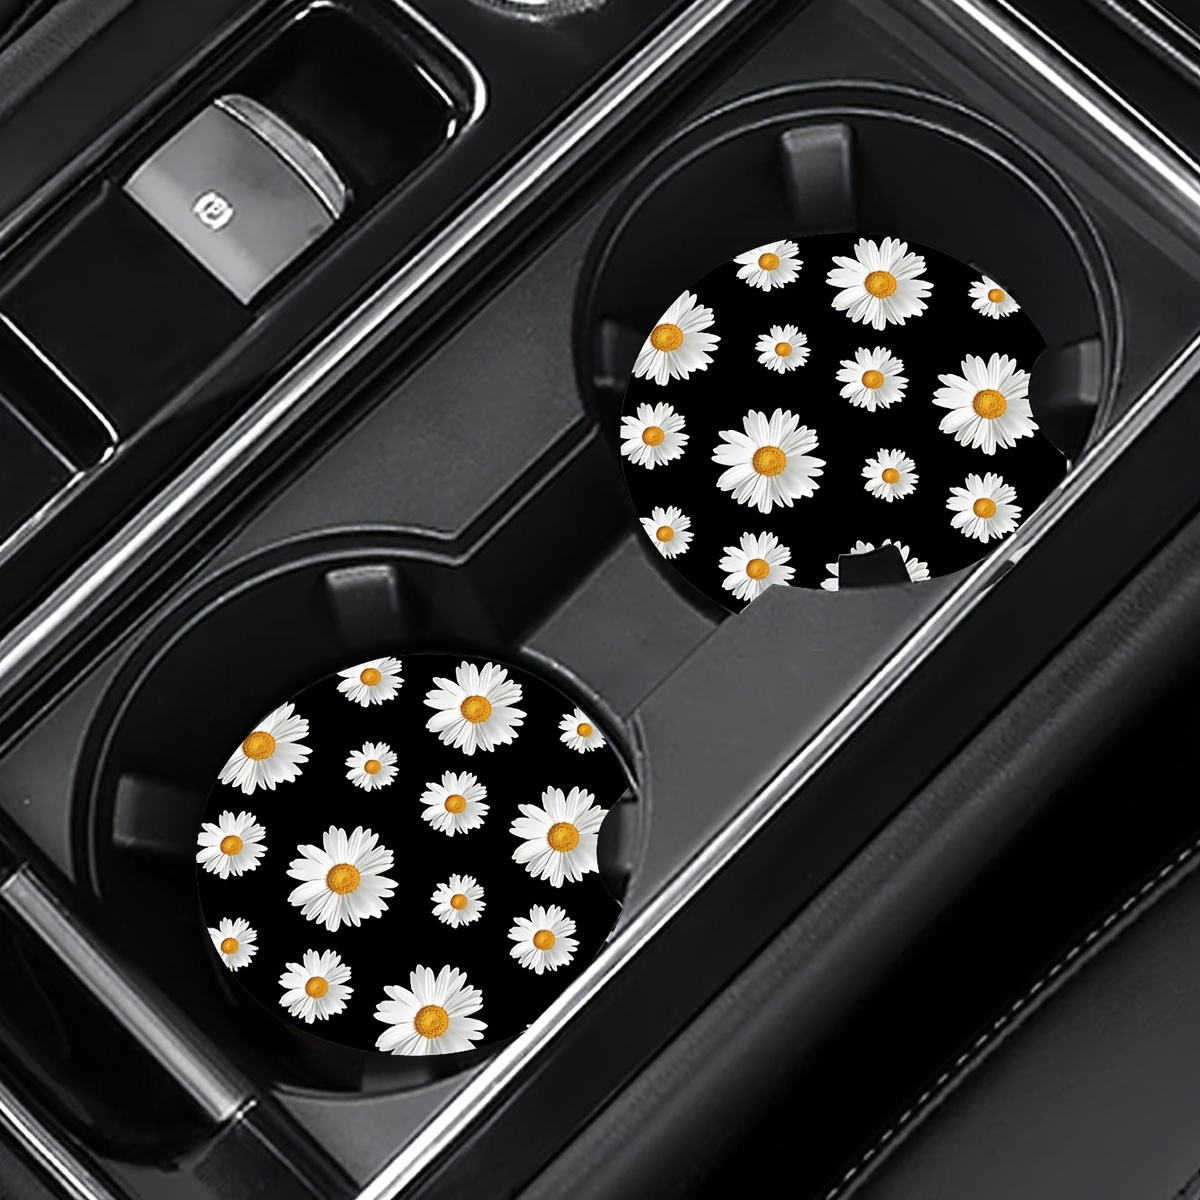 

Add A Touch Of Nature To Your Car Interior With These Stylish Daisy Flower Car Coasters!